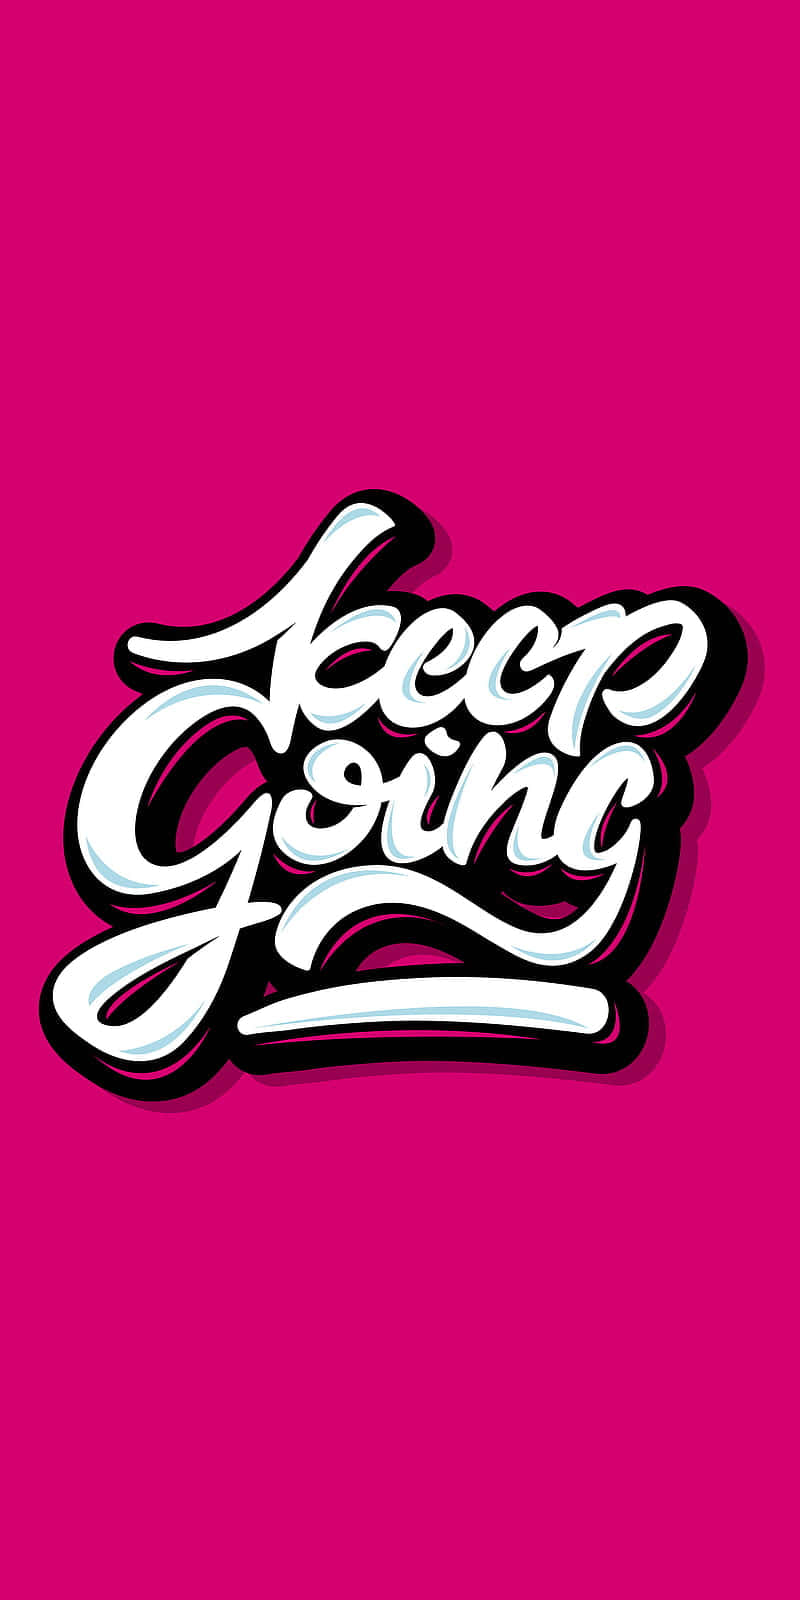 Keep Going Logo On A Pink Background Wallpaper